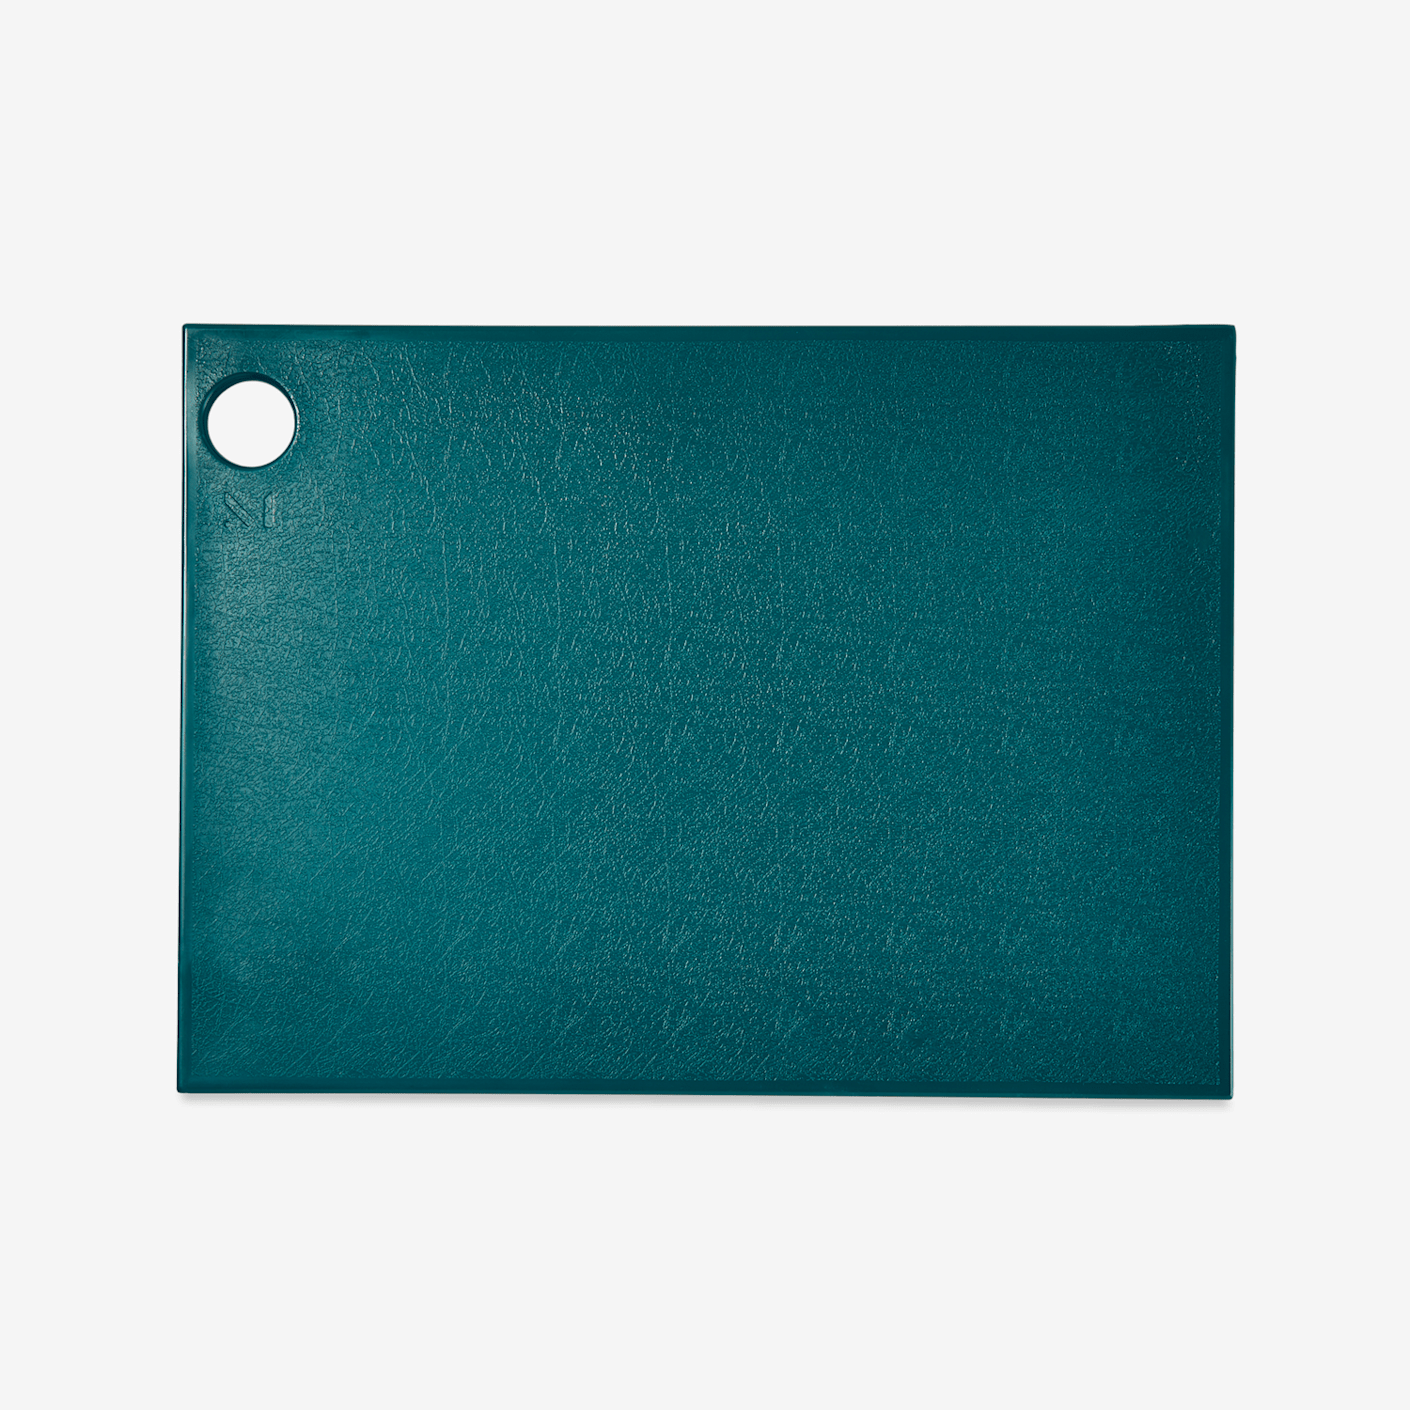 Bespoke Post reBoard Mini Cutting Board by Material 13.3”x 8.5” 75%  Recycled